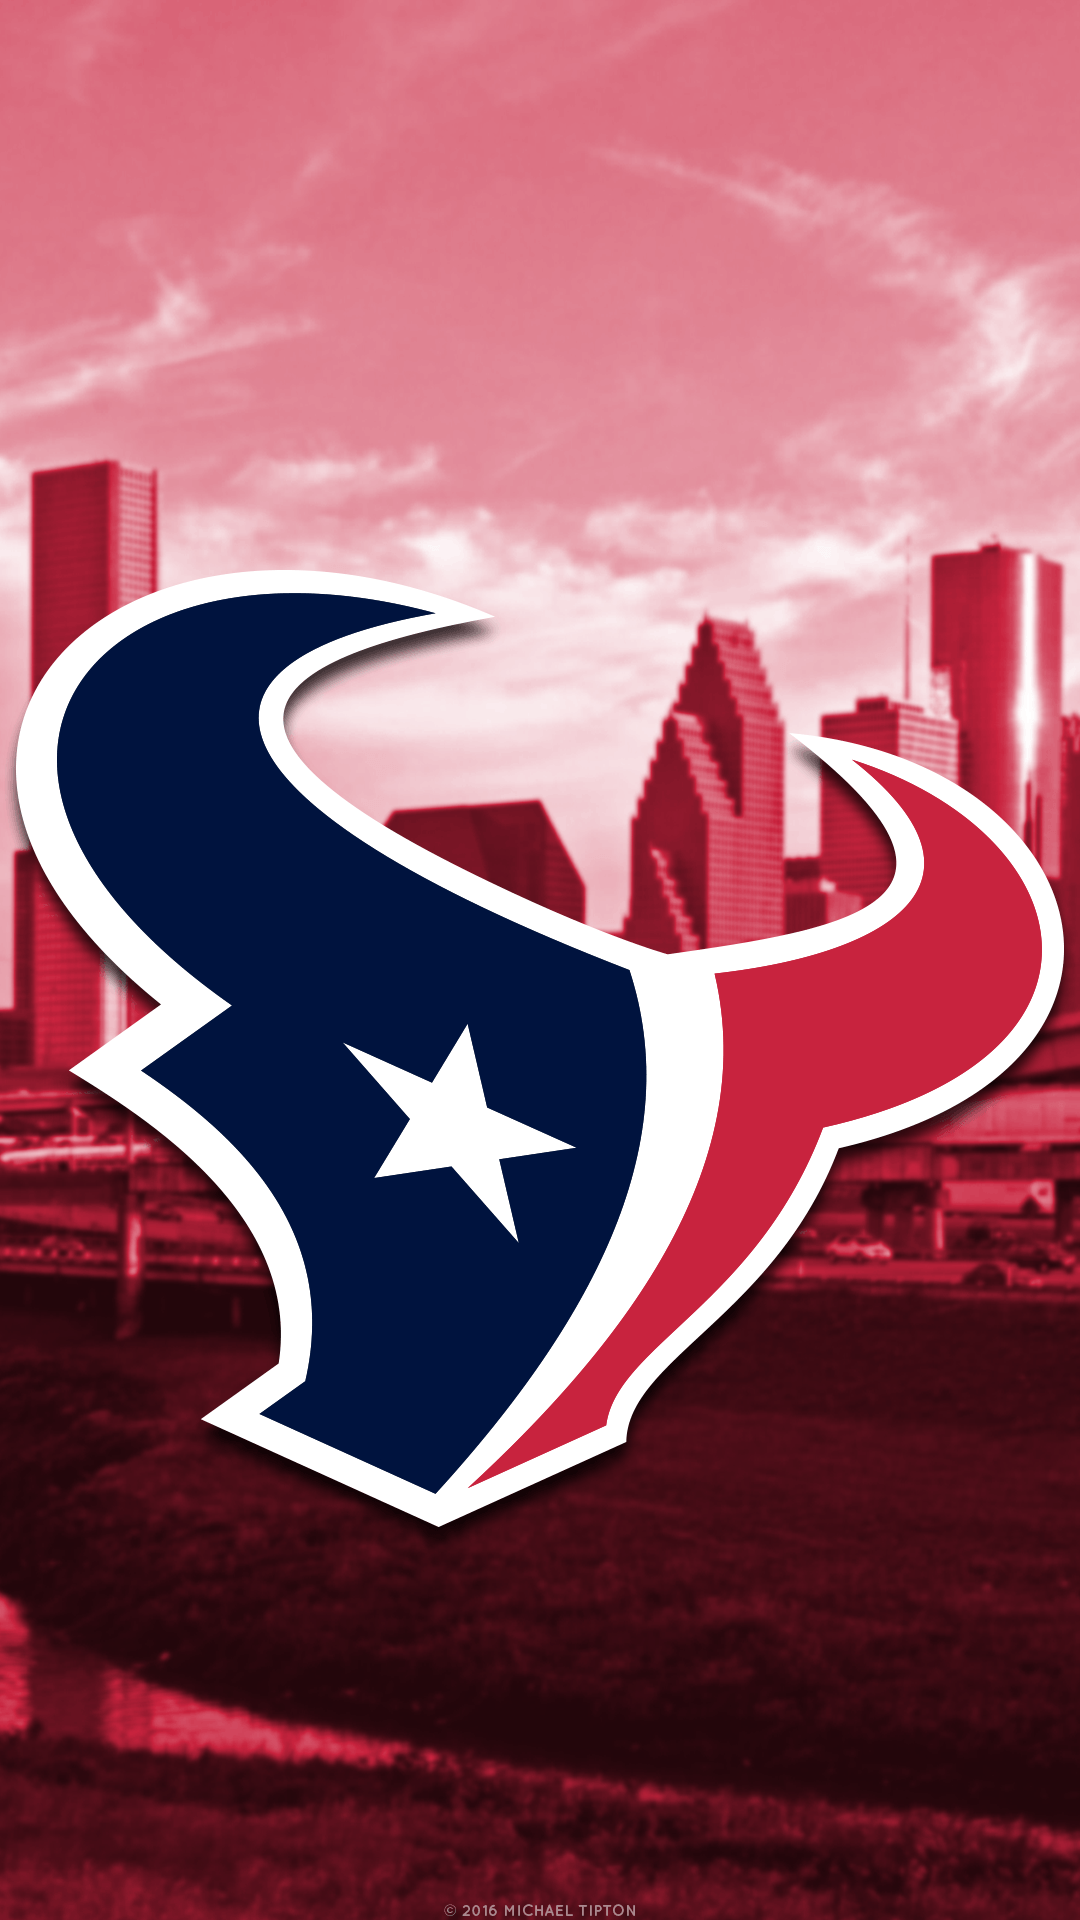 NFL Texans Logo - 2018 Houston Texans Wallpapers - PC |iPhone| Android